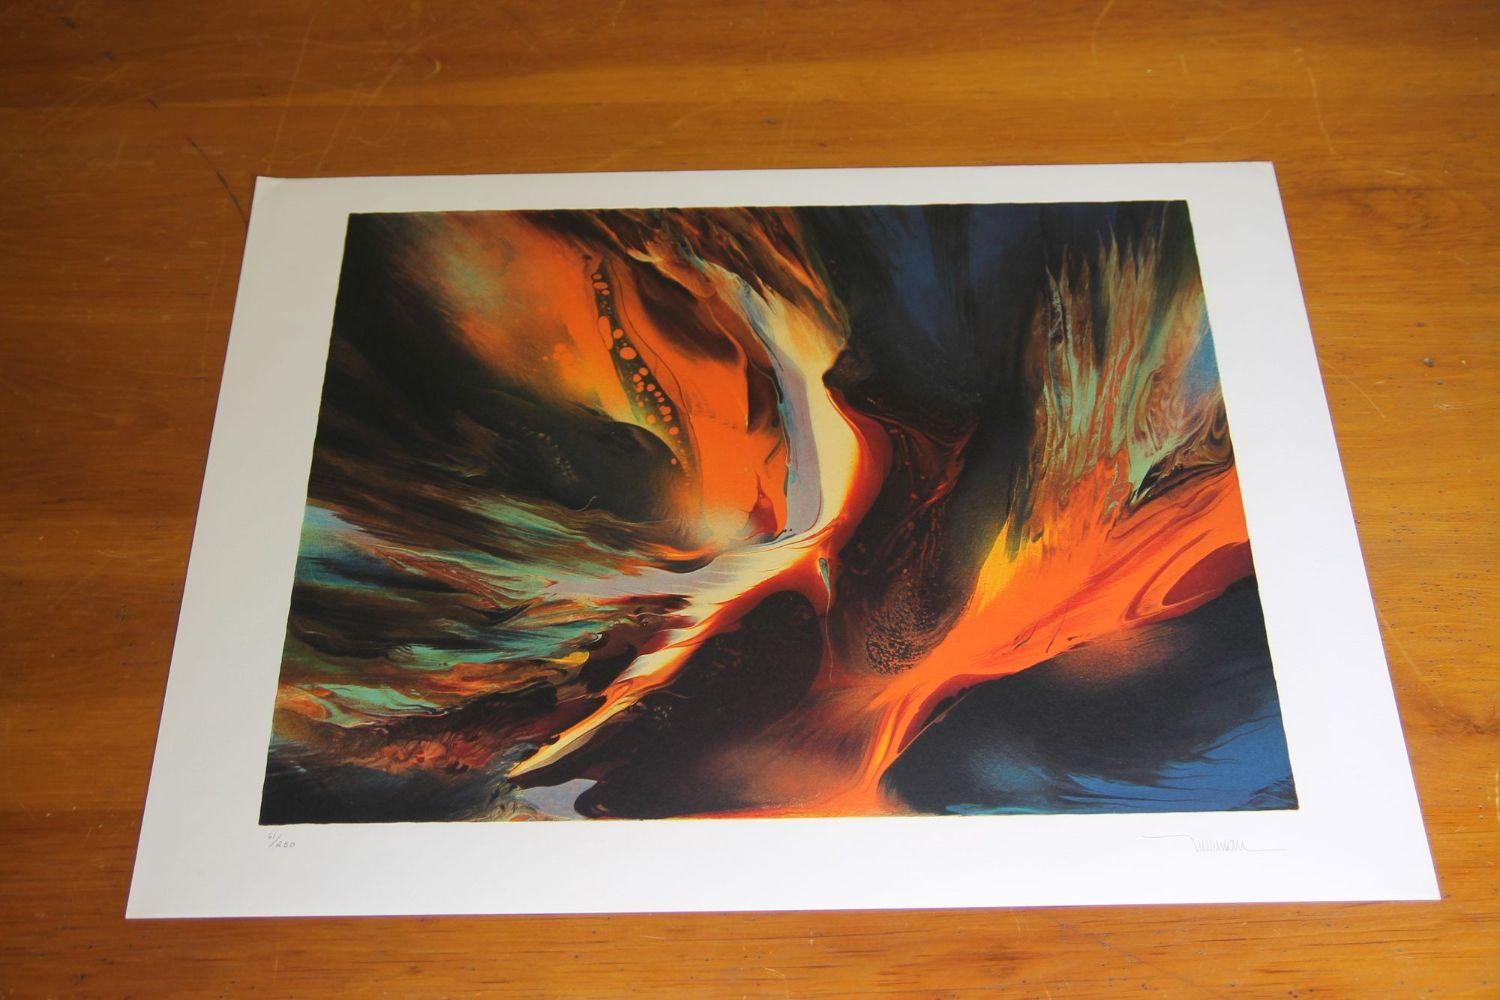 Im selling a rare 3 print portfolio by the Mexican artist Leonardo Nierman. This 250 release set was produced in 1974. The three piece of art are, Cosmic Wind, Firebird, and Flight to the Sun. Each one is numbered and signed by the artist (61/250).